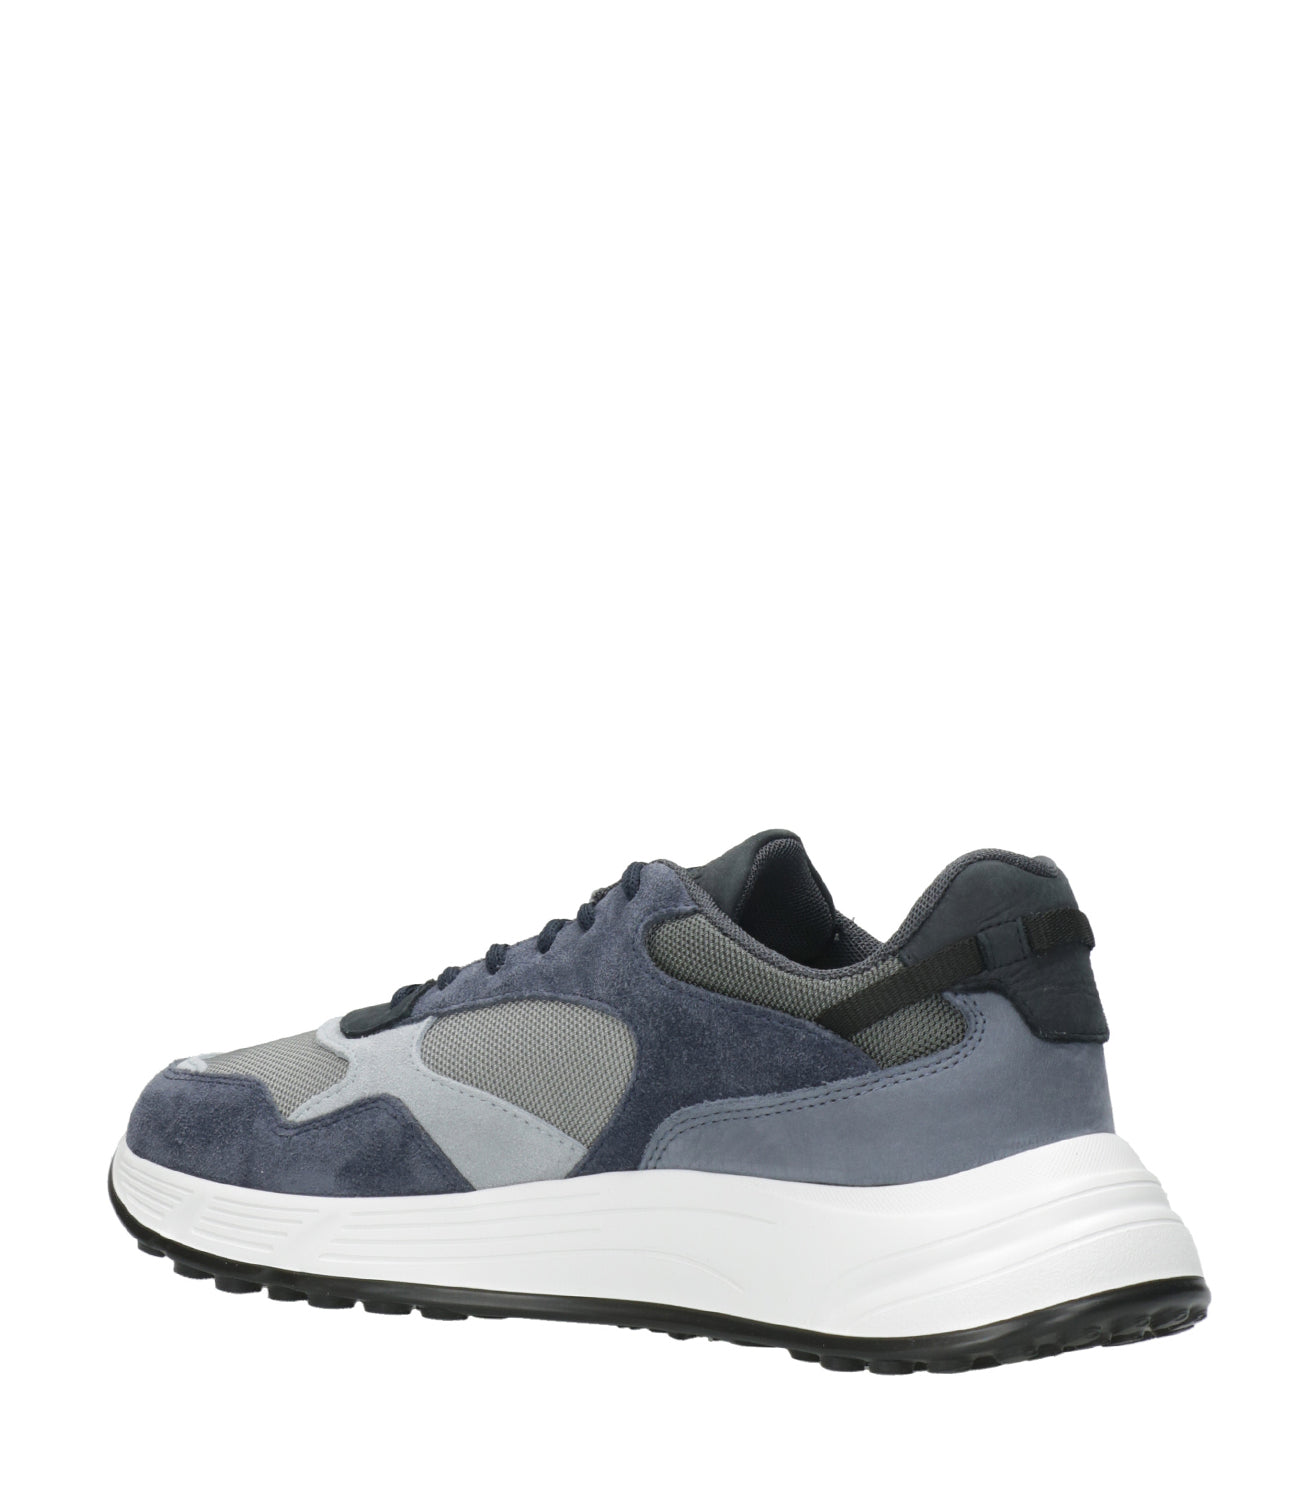 Hogan | Hyperlight Lace-up Sneakers Blue, Gray and Black